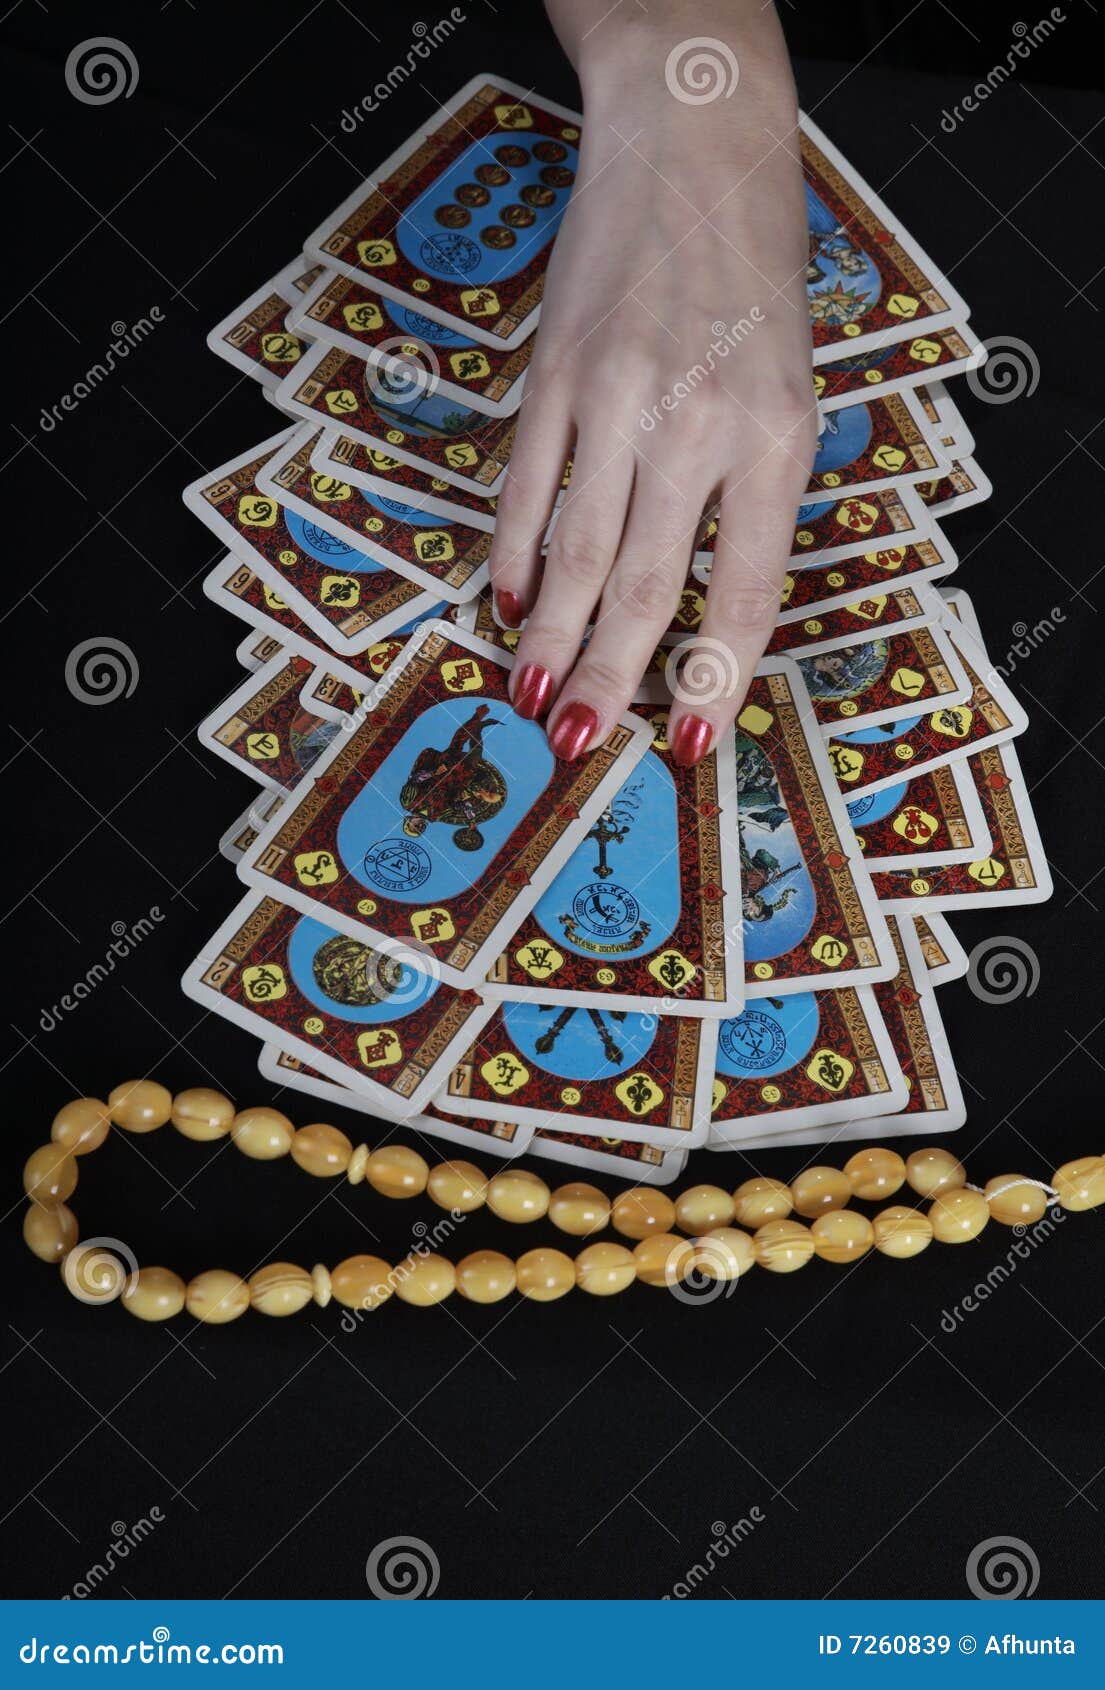 hands of the fortuneteller